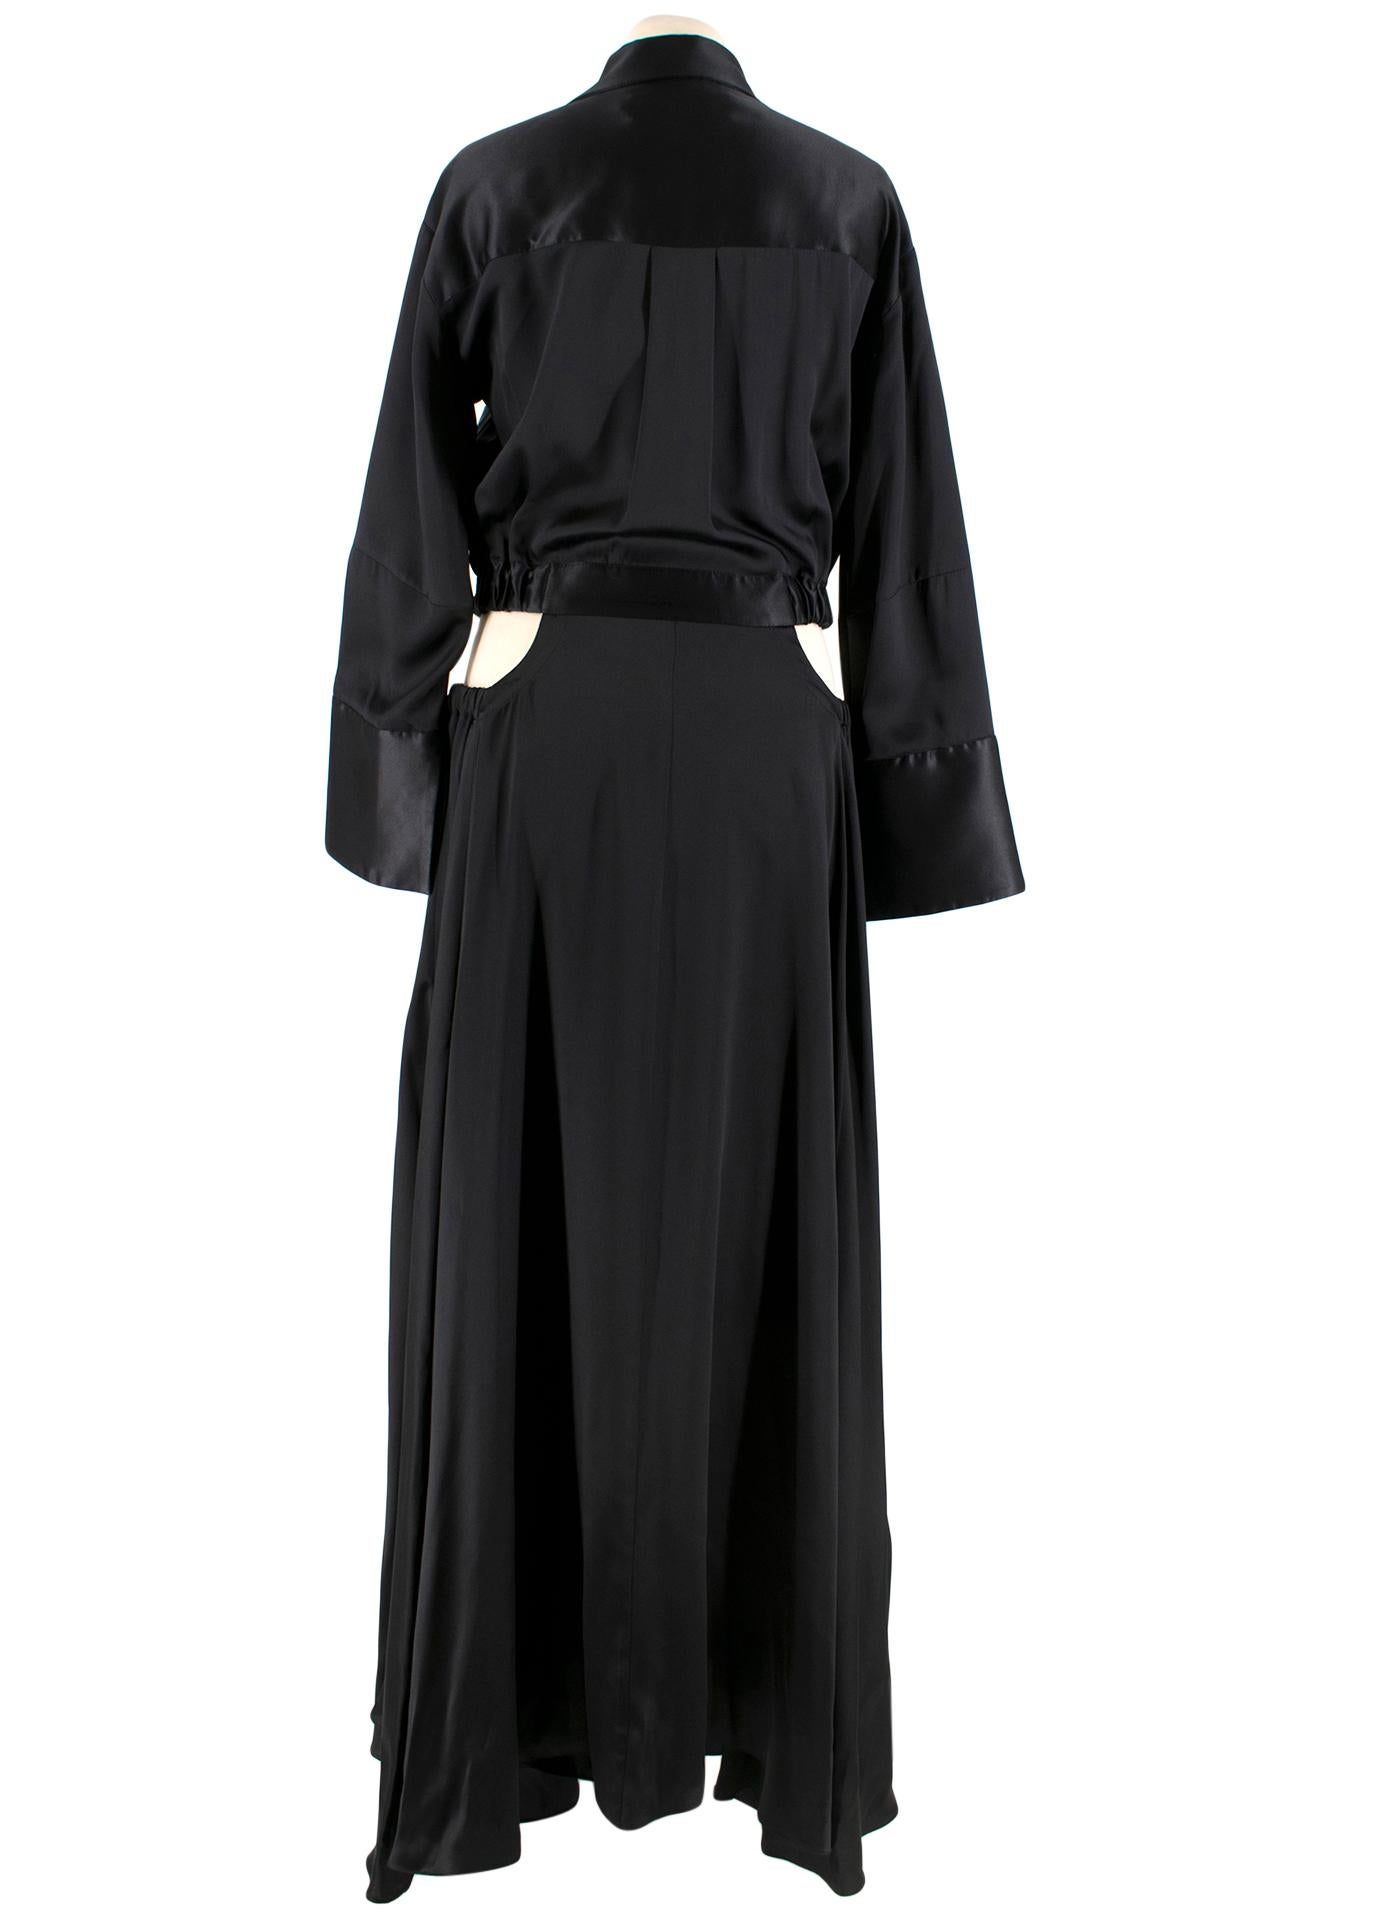 Michael Lo Sordo cutout silk maxi dress taking a much relaxed approach to evening wear. This maxi dress is made from lustrous black silk-satin and detailed with cutouts that sit low on the hips

- Button fastenings along front
- Dry clean
- Cut to